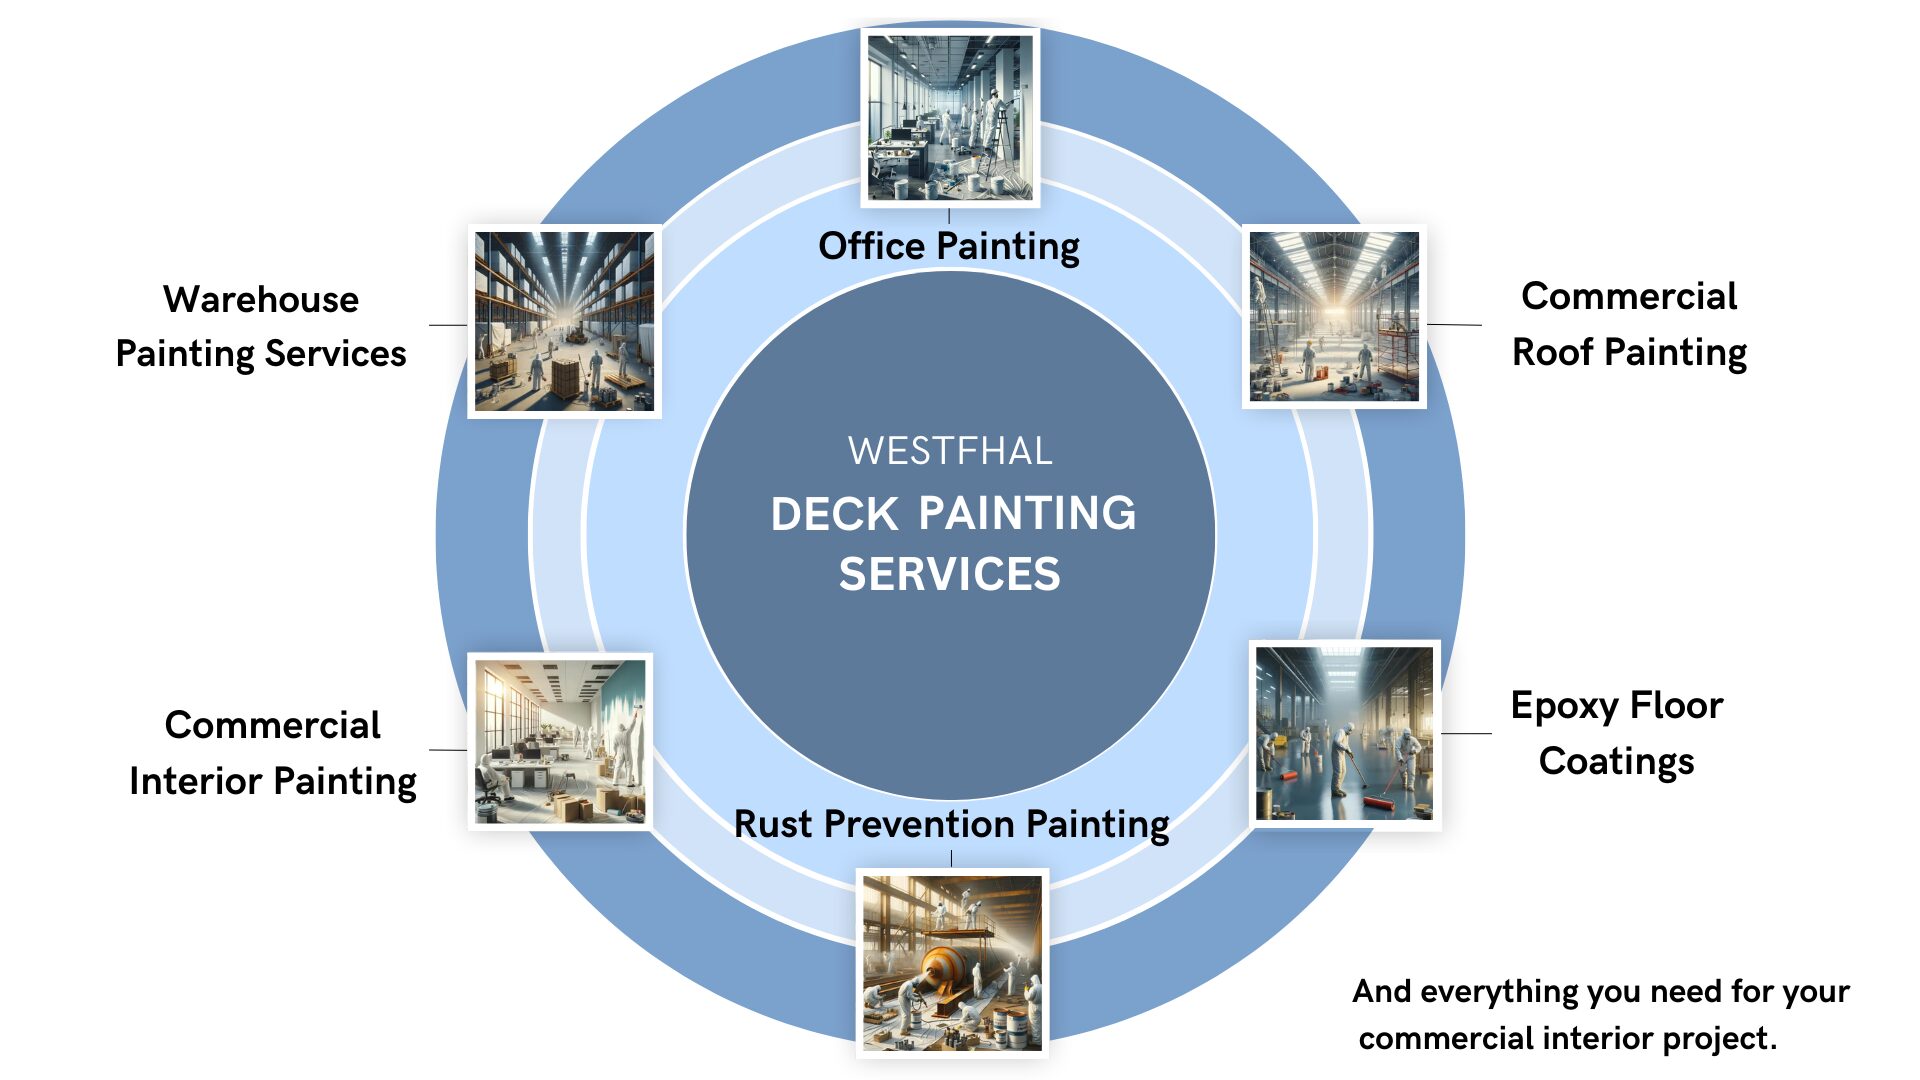 Infographic displaying the top commercial interior painting services offered by Westfhal Painting.